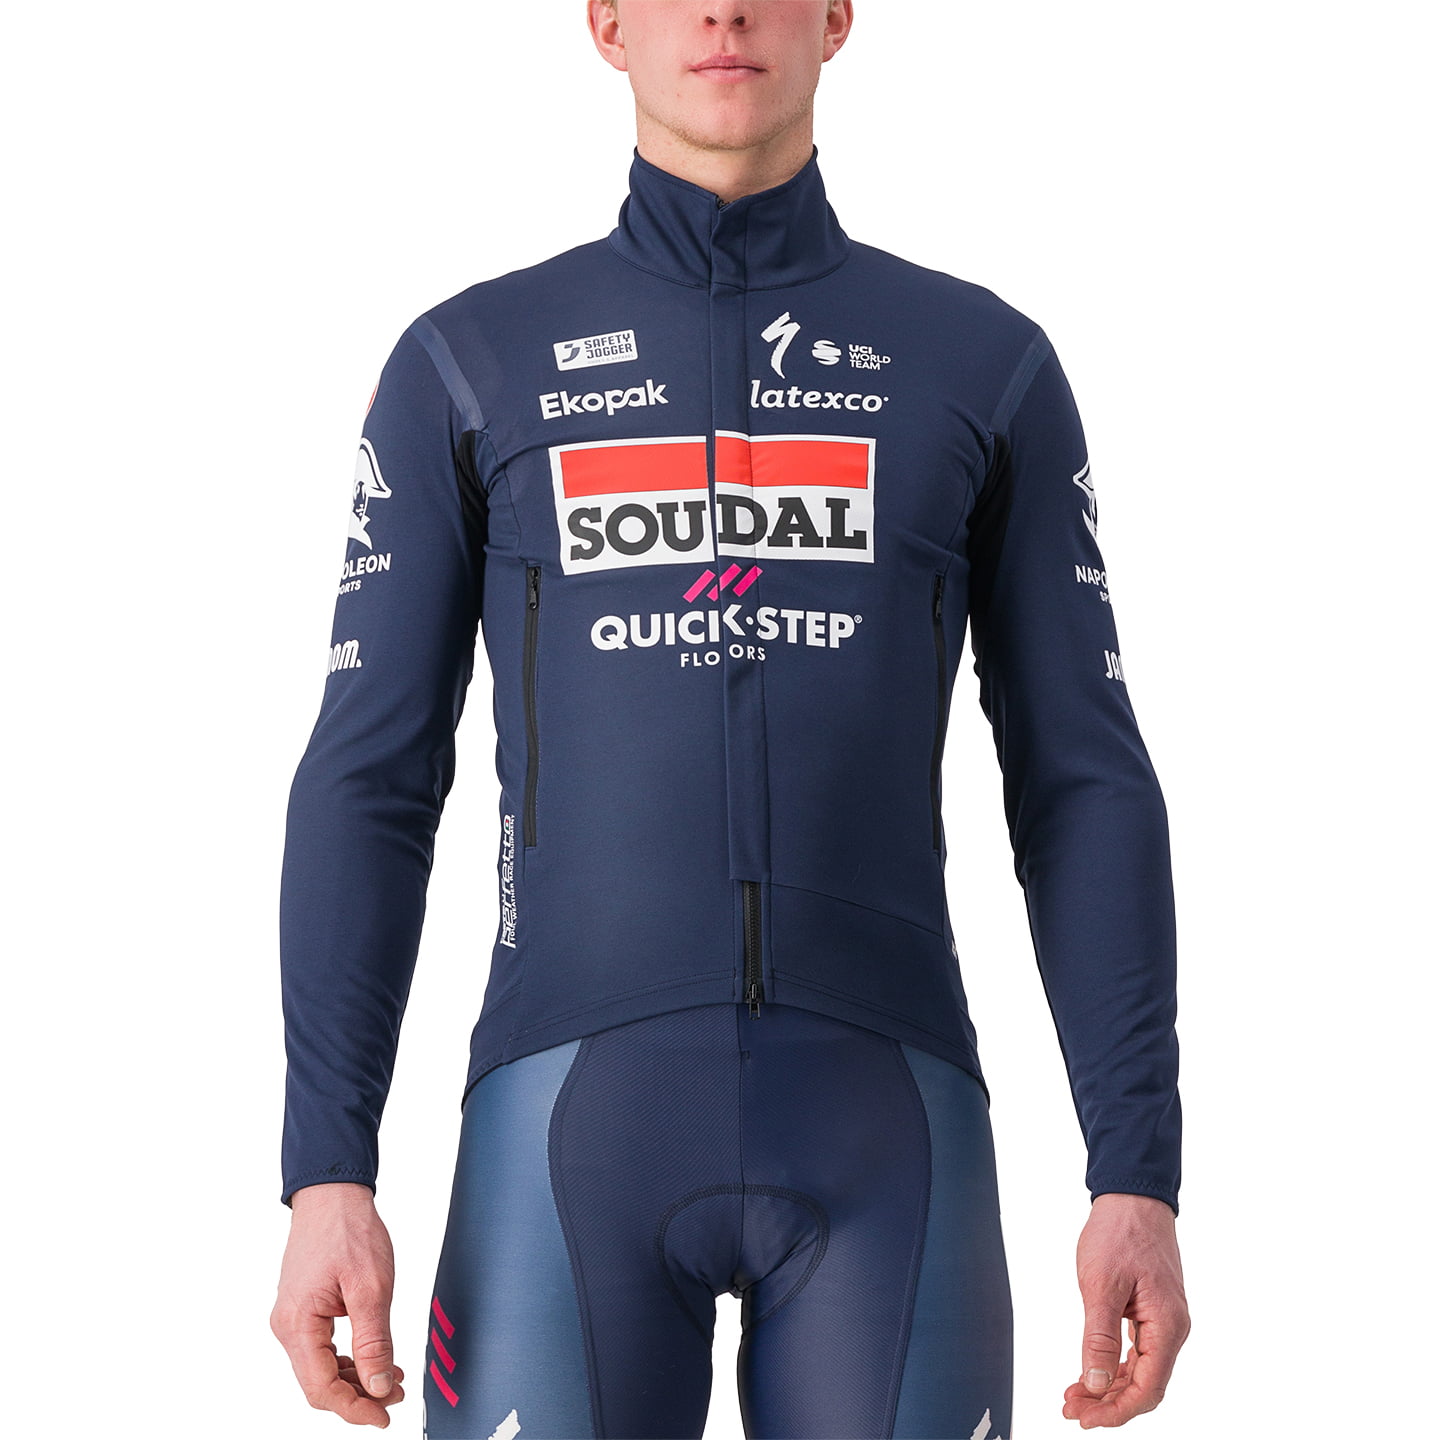 SOUDAL QUICK-STEP Perfetto RoS 2 2023 Light Jacket, for men, size 2XL, MTB jacket, Cycling gear